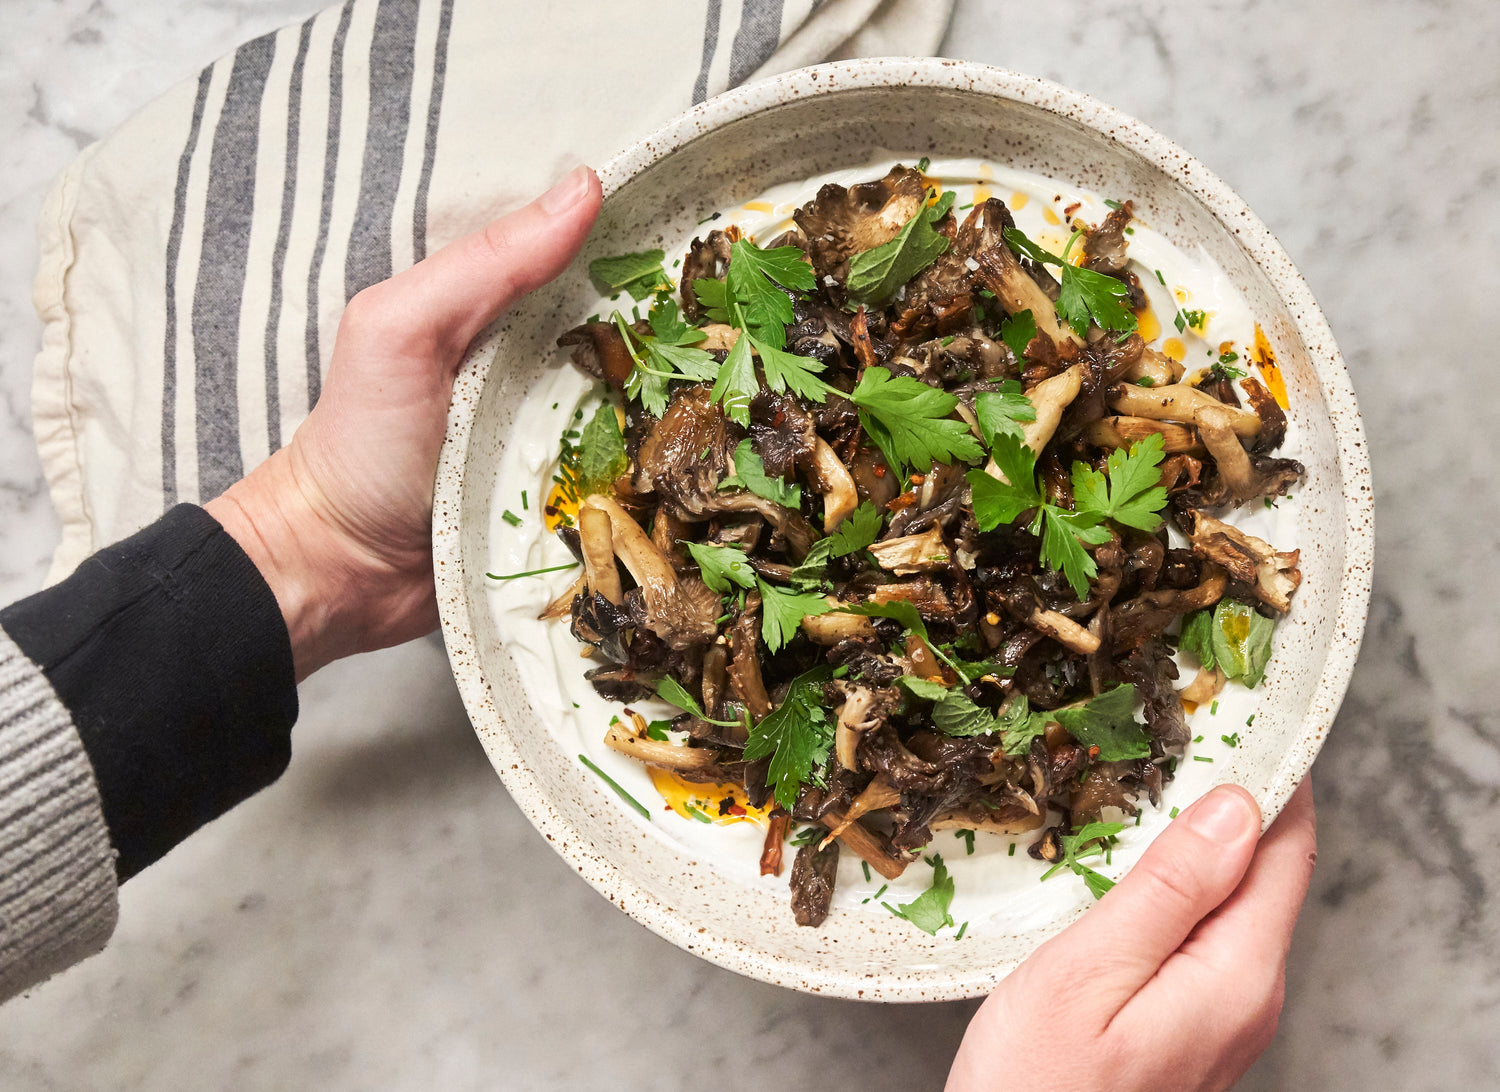 Colu Henry's Roasted Mushrooms with Sour Cream and Herbs